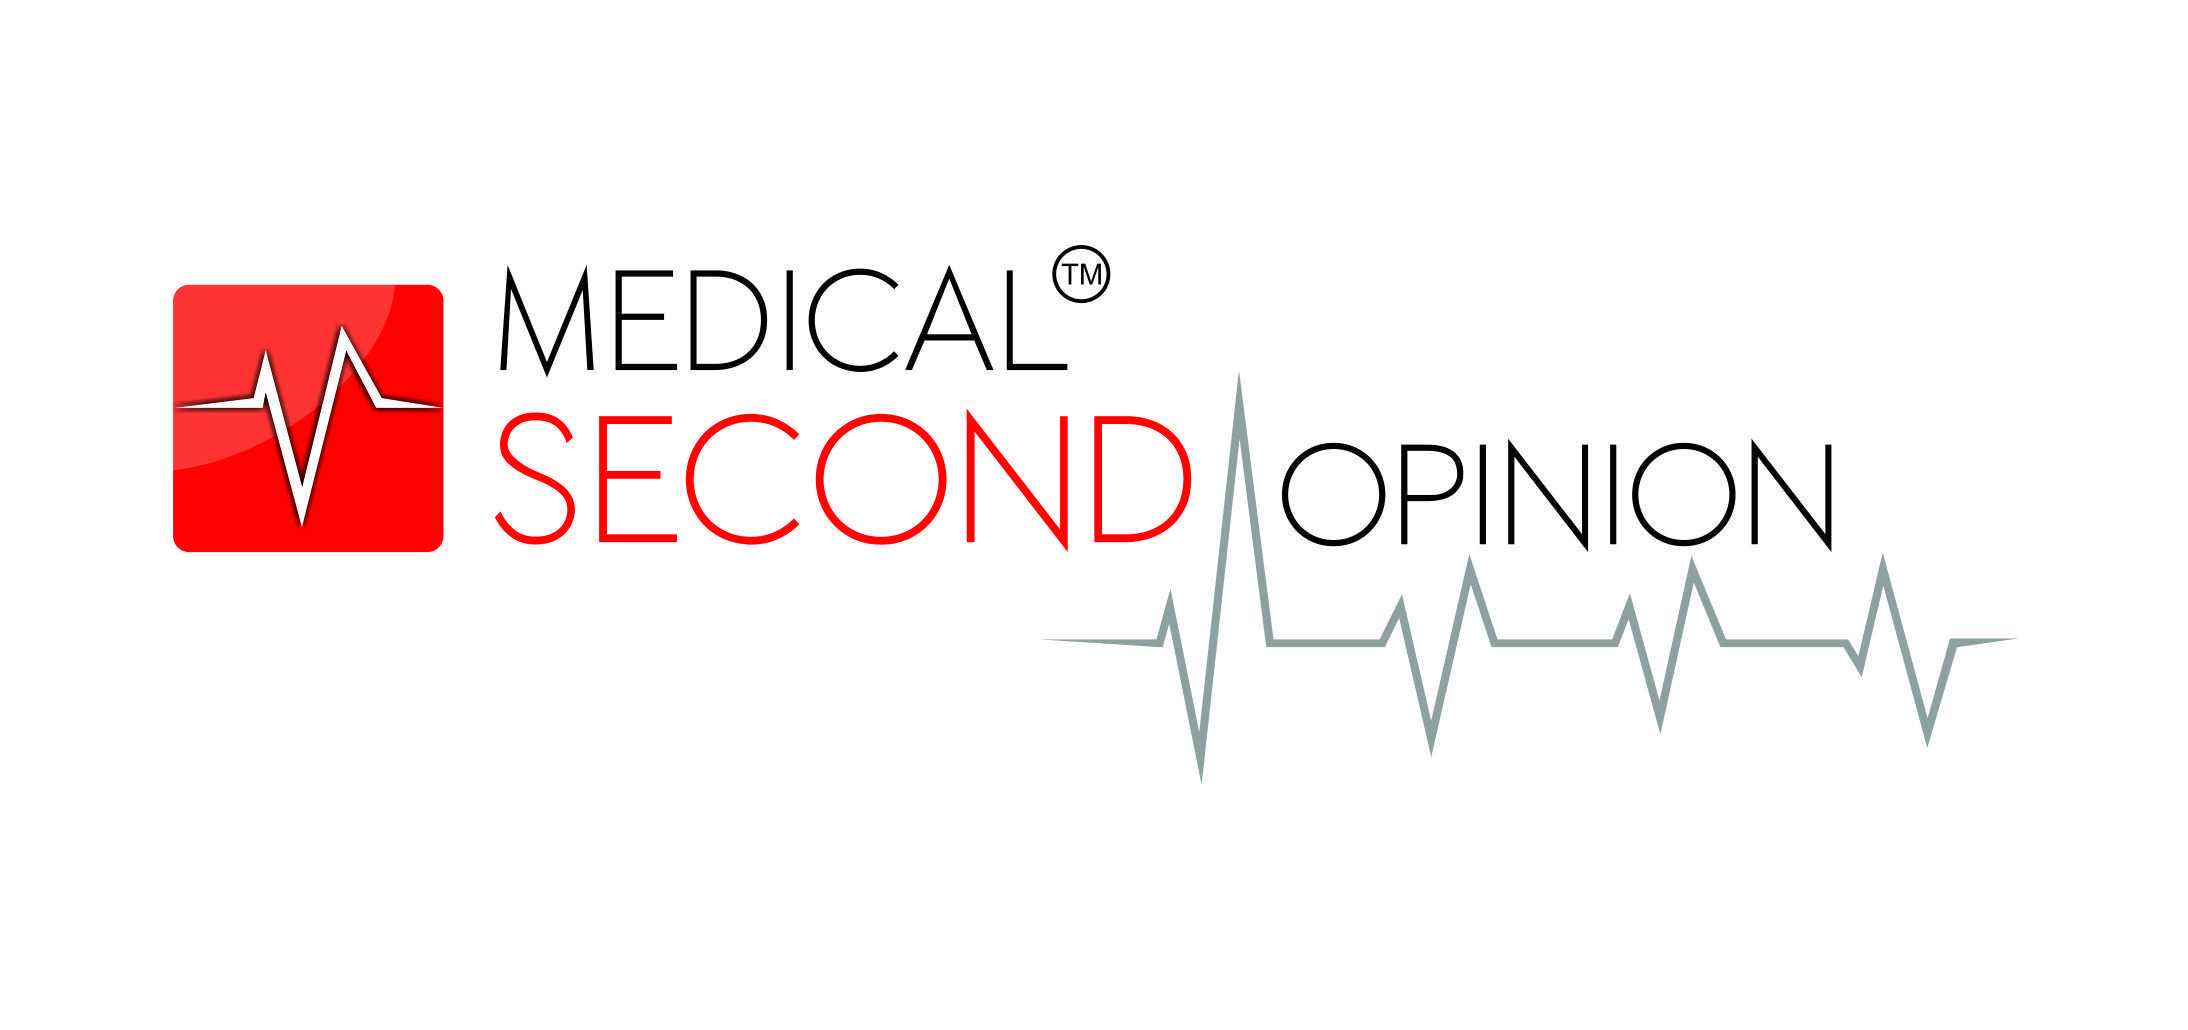 Medical Second Opinion – Is It Really Helpful?